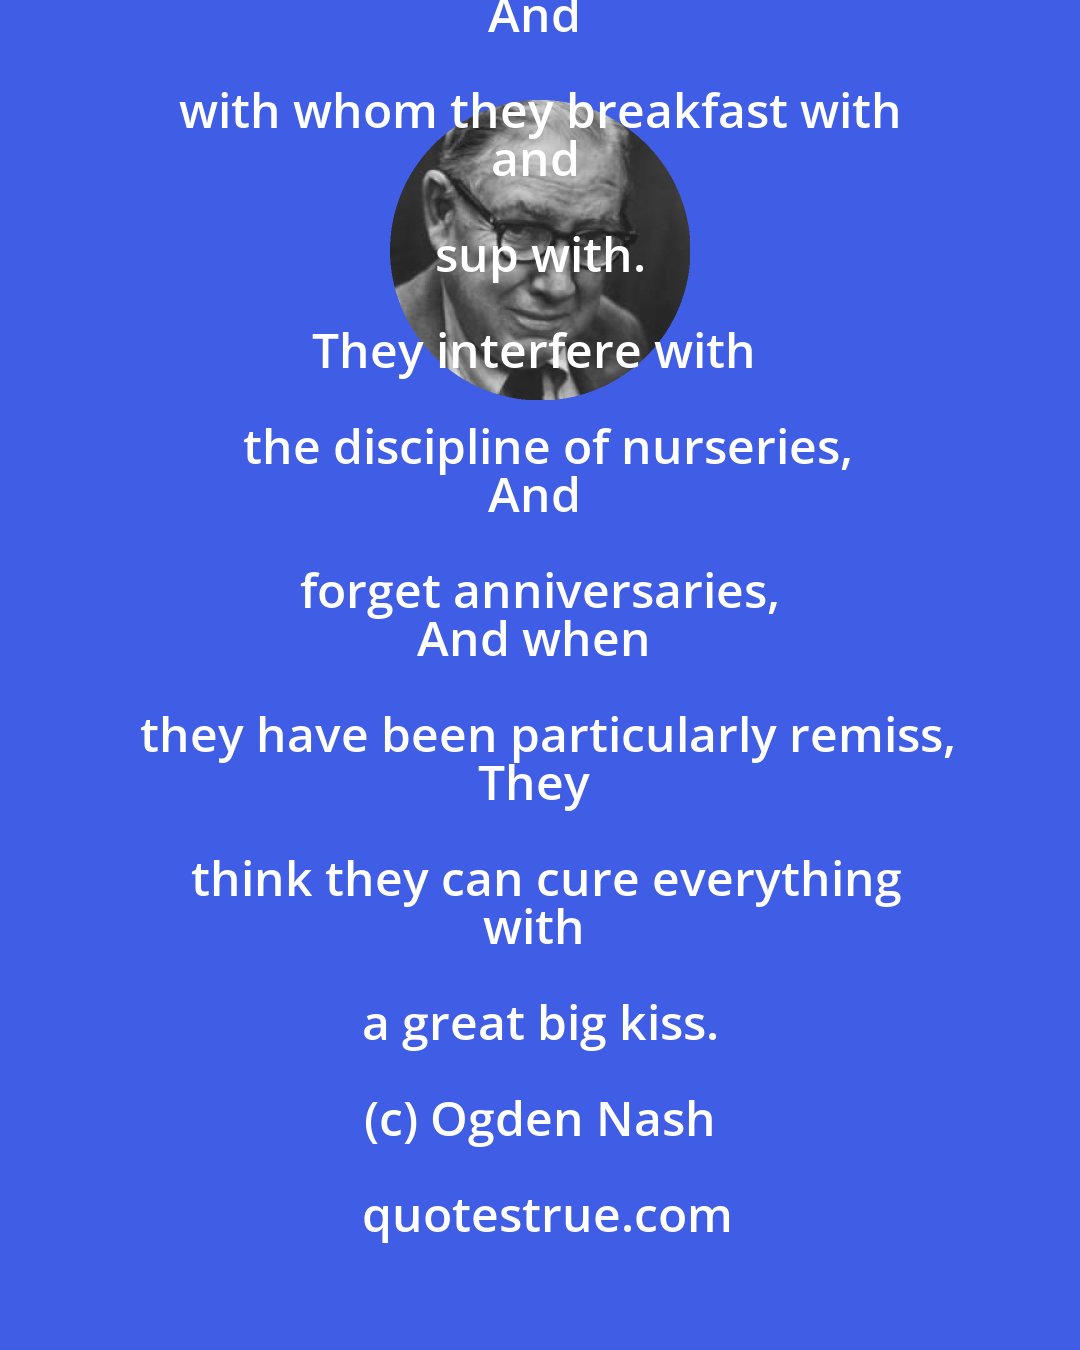 Ogden Nash: Husbands are things that wives have to
get used to putting up with.
And with whom they breakfast with 
and sup with. 

They interfere with the discipline of nurseries,
And forget anniversaries, 
And when they have been particularly remiss,
They think they can cure everything
with a great big kiss.